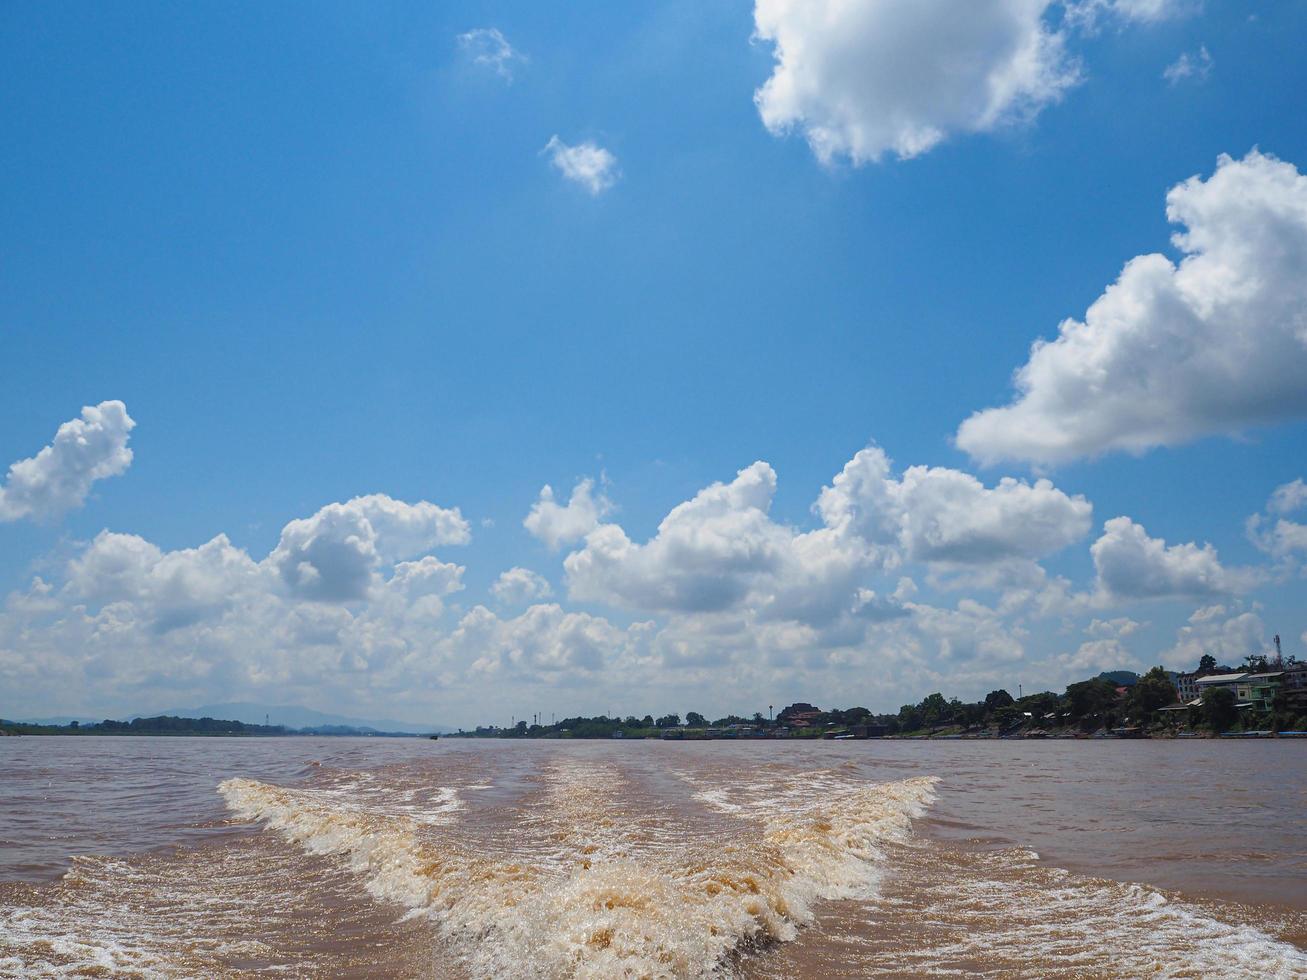 Speed boat trip on the Mekong river in Chiang sean, Thailand photo